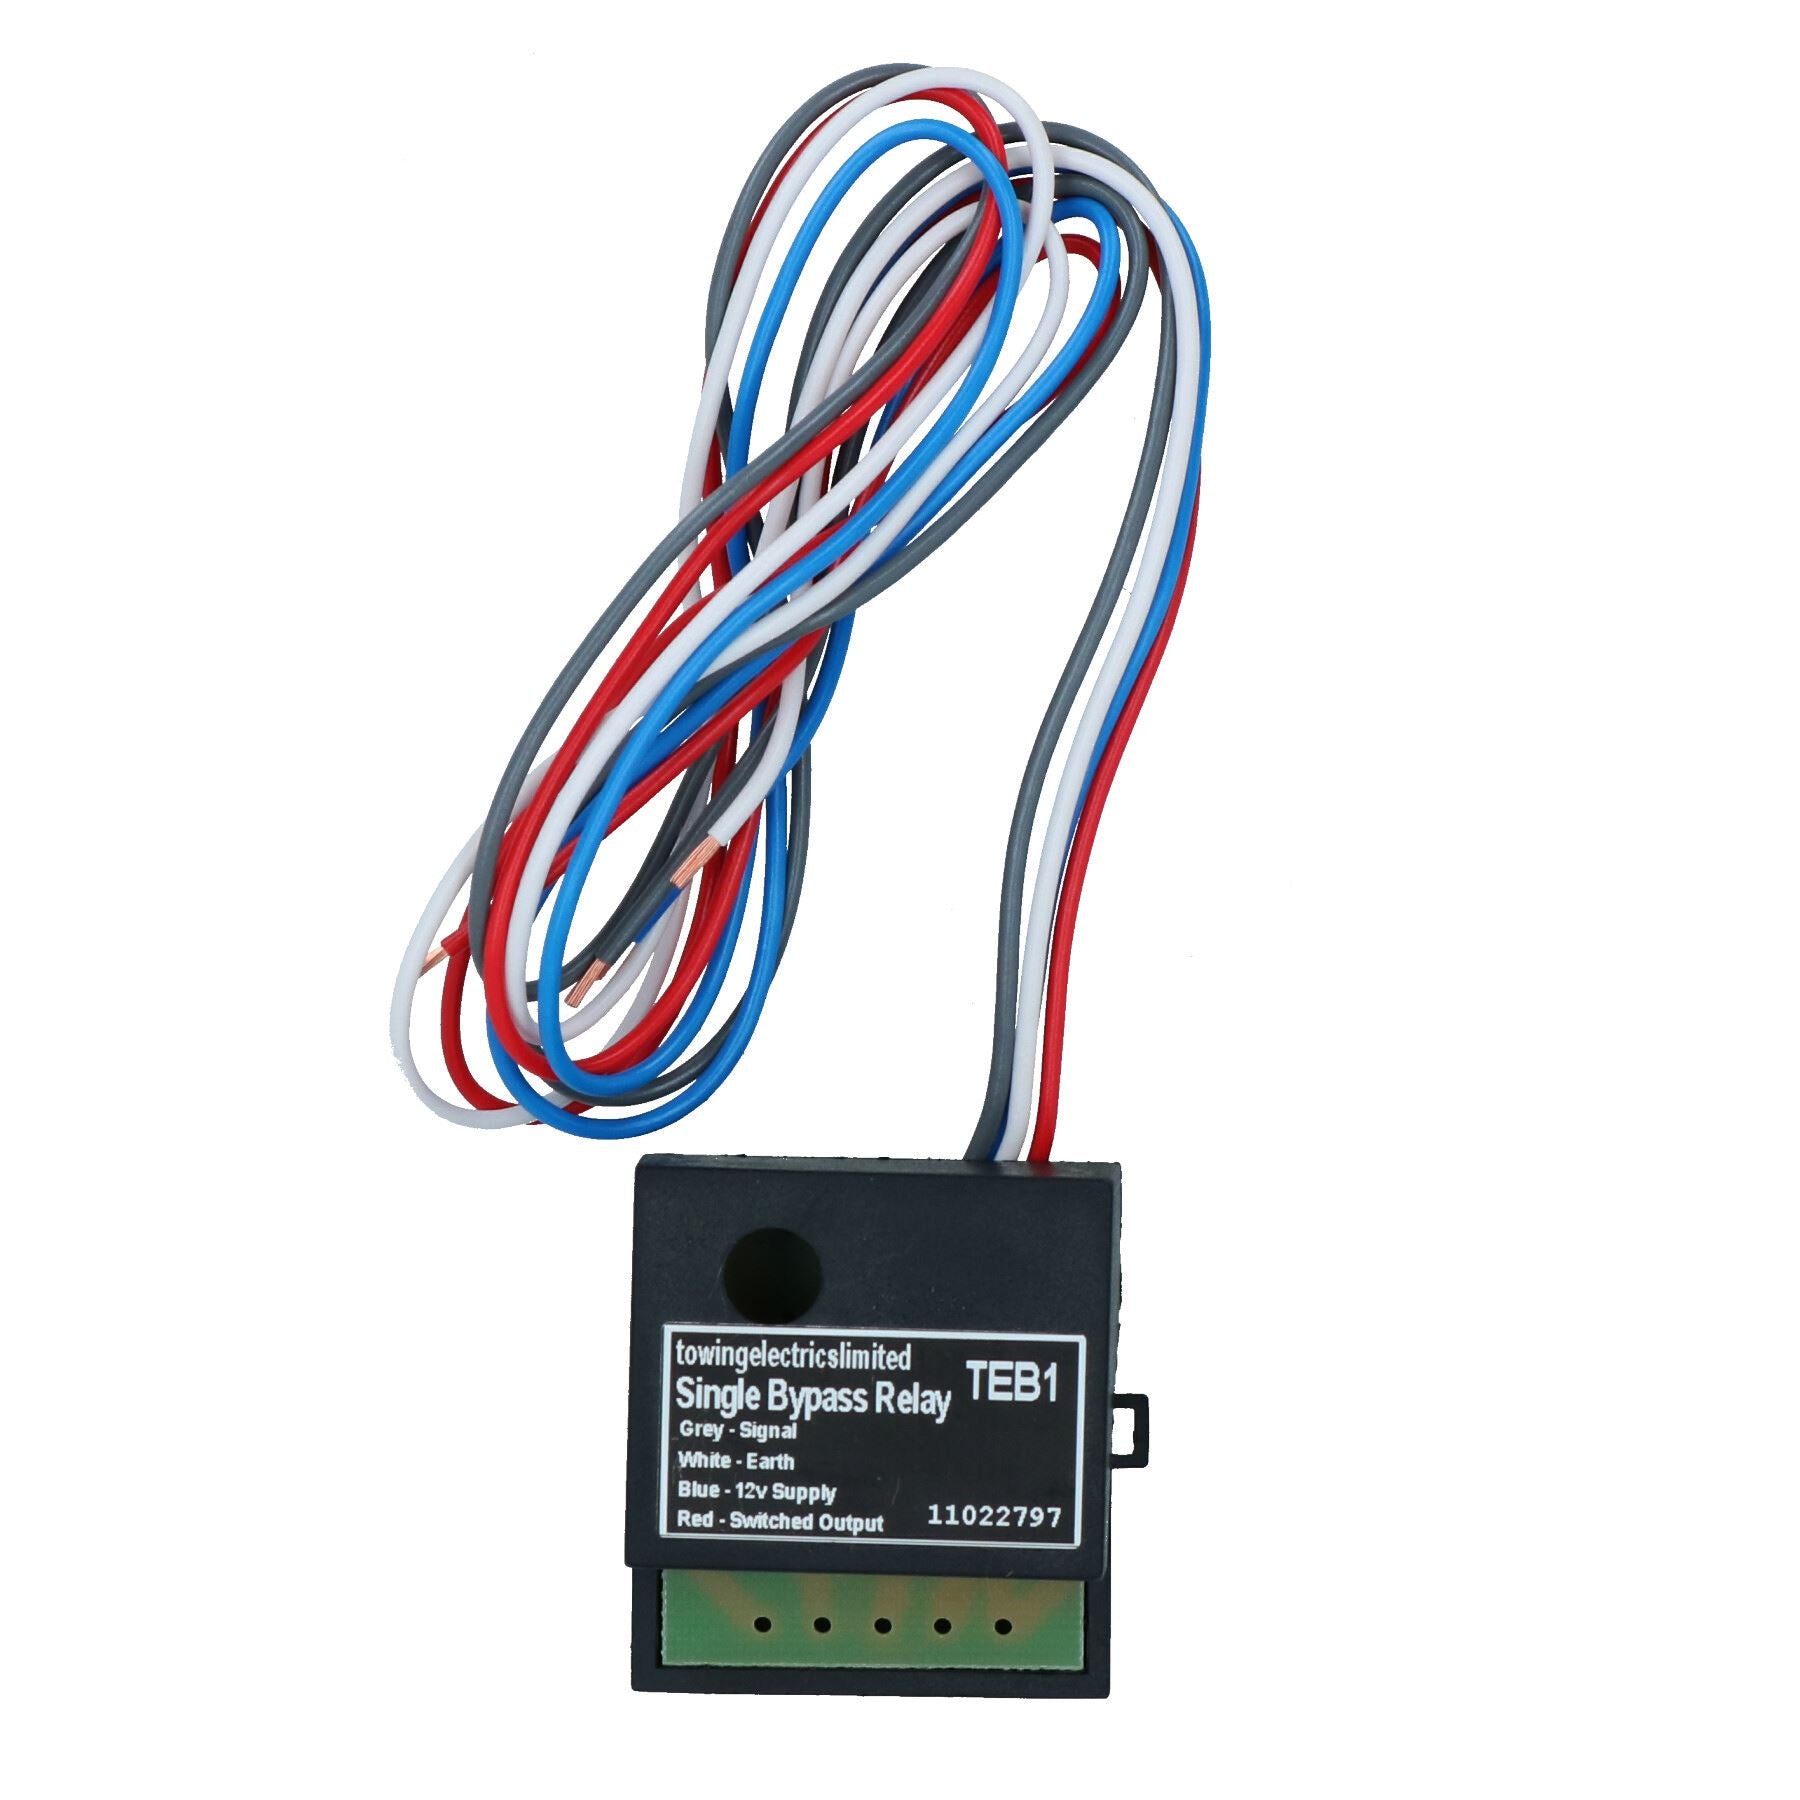 Single 1 Way 12v Bypass Relay Module for Ignition Feed Trailer Lights etc